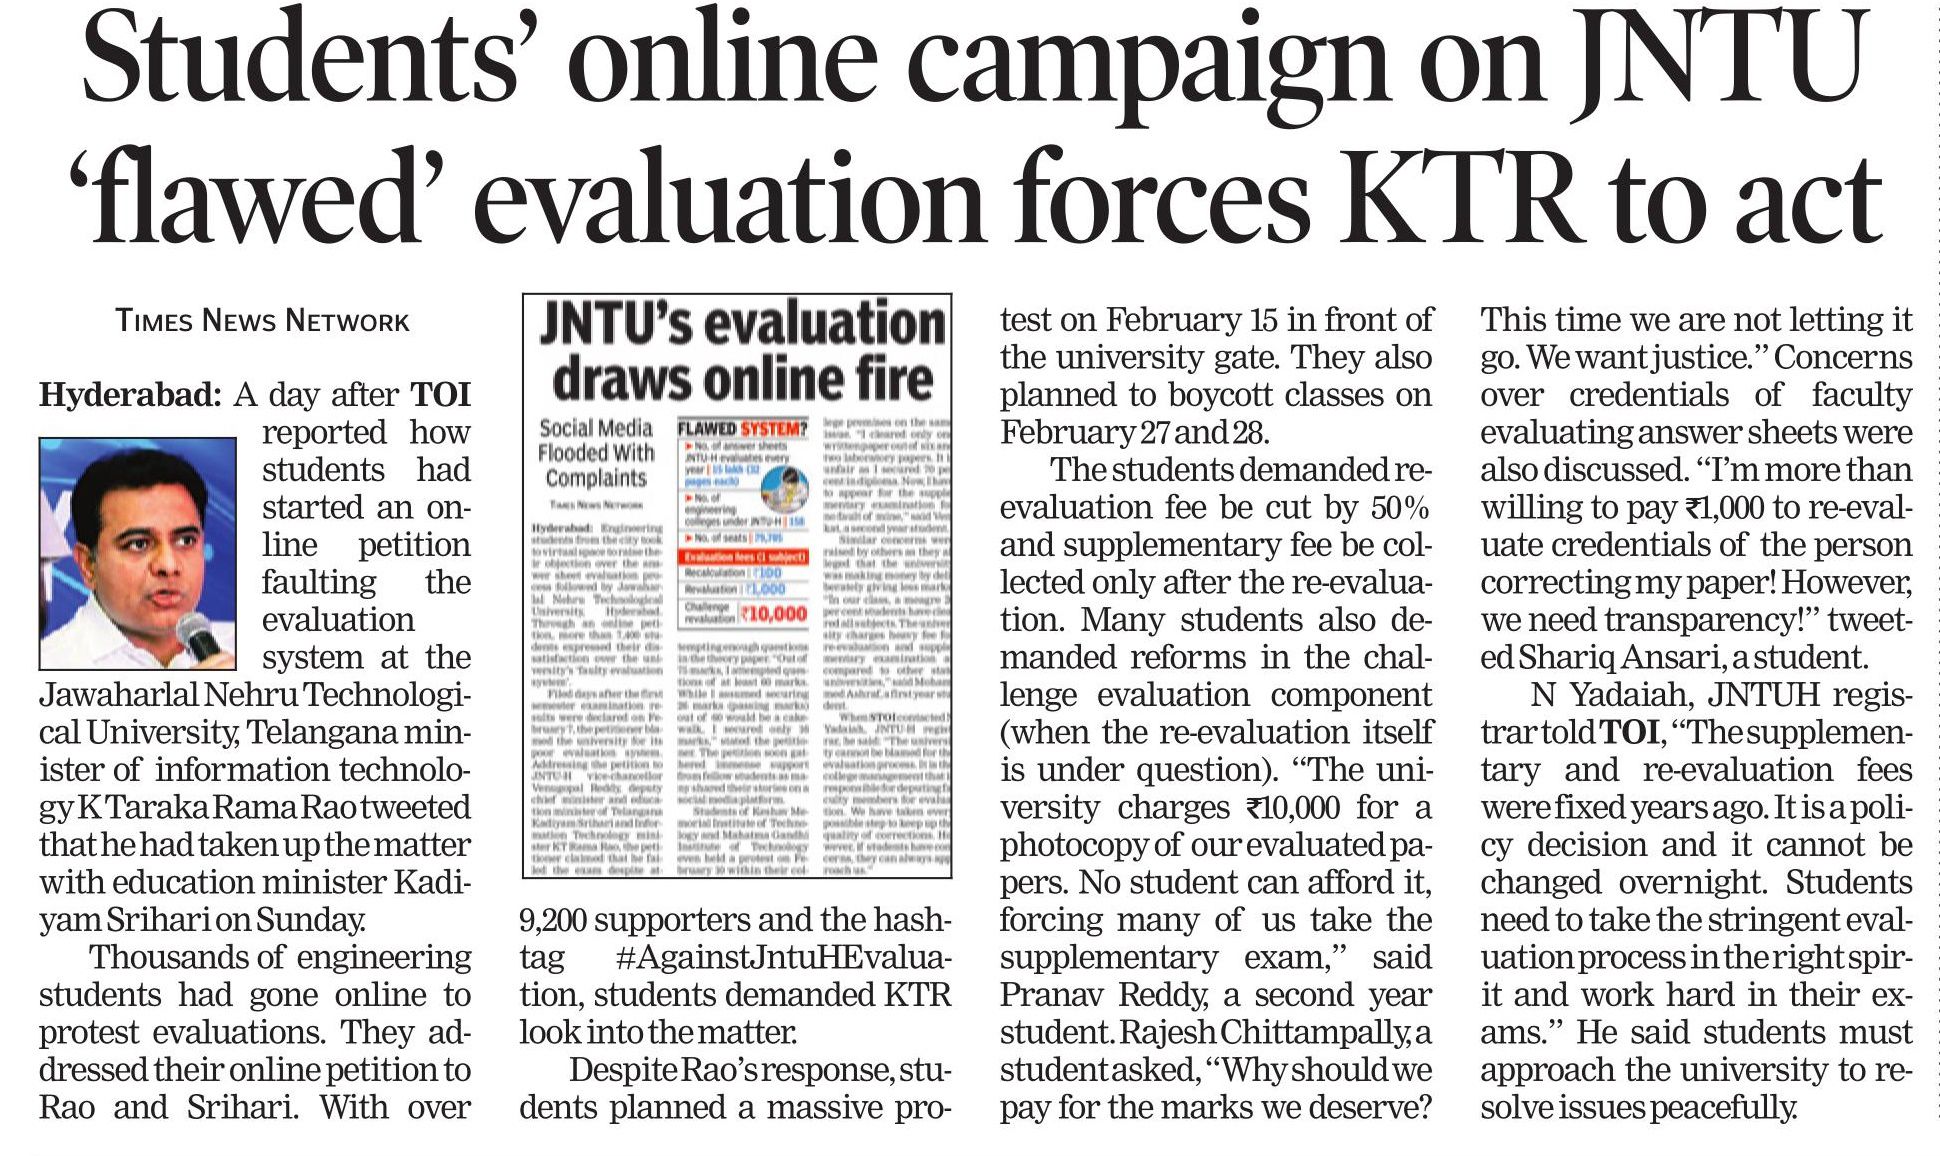 Students' online campaign on JNTU 'flawed' evaluation forces KTR to act